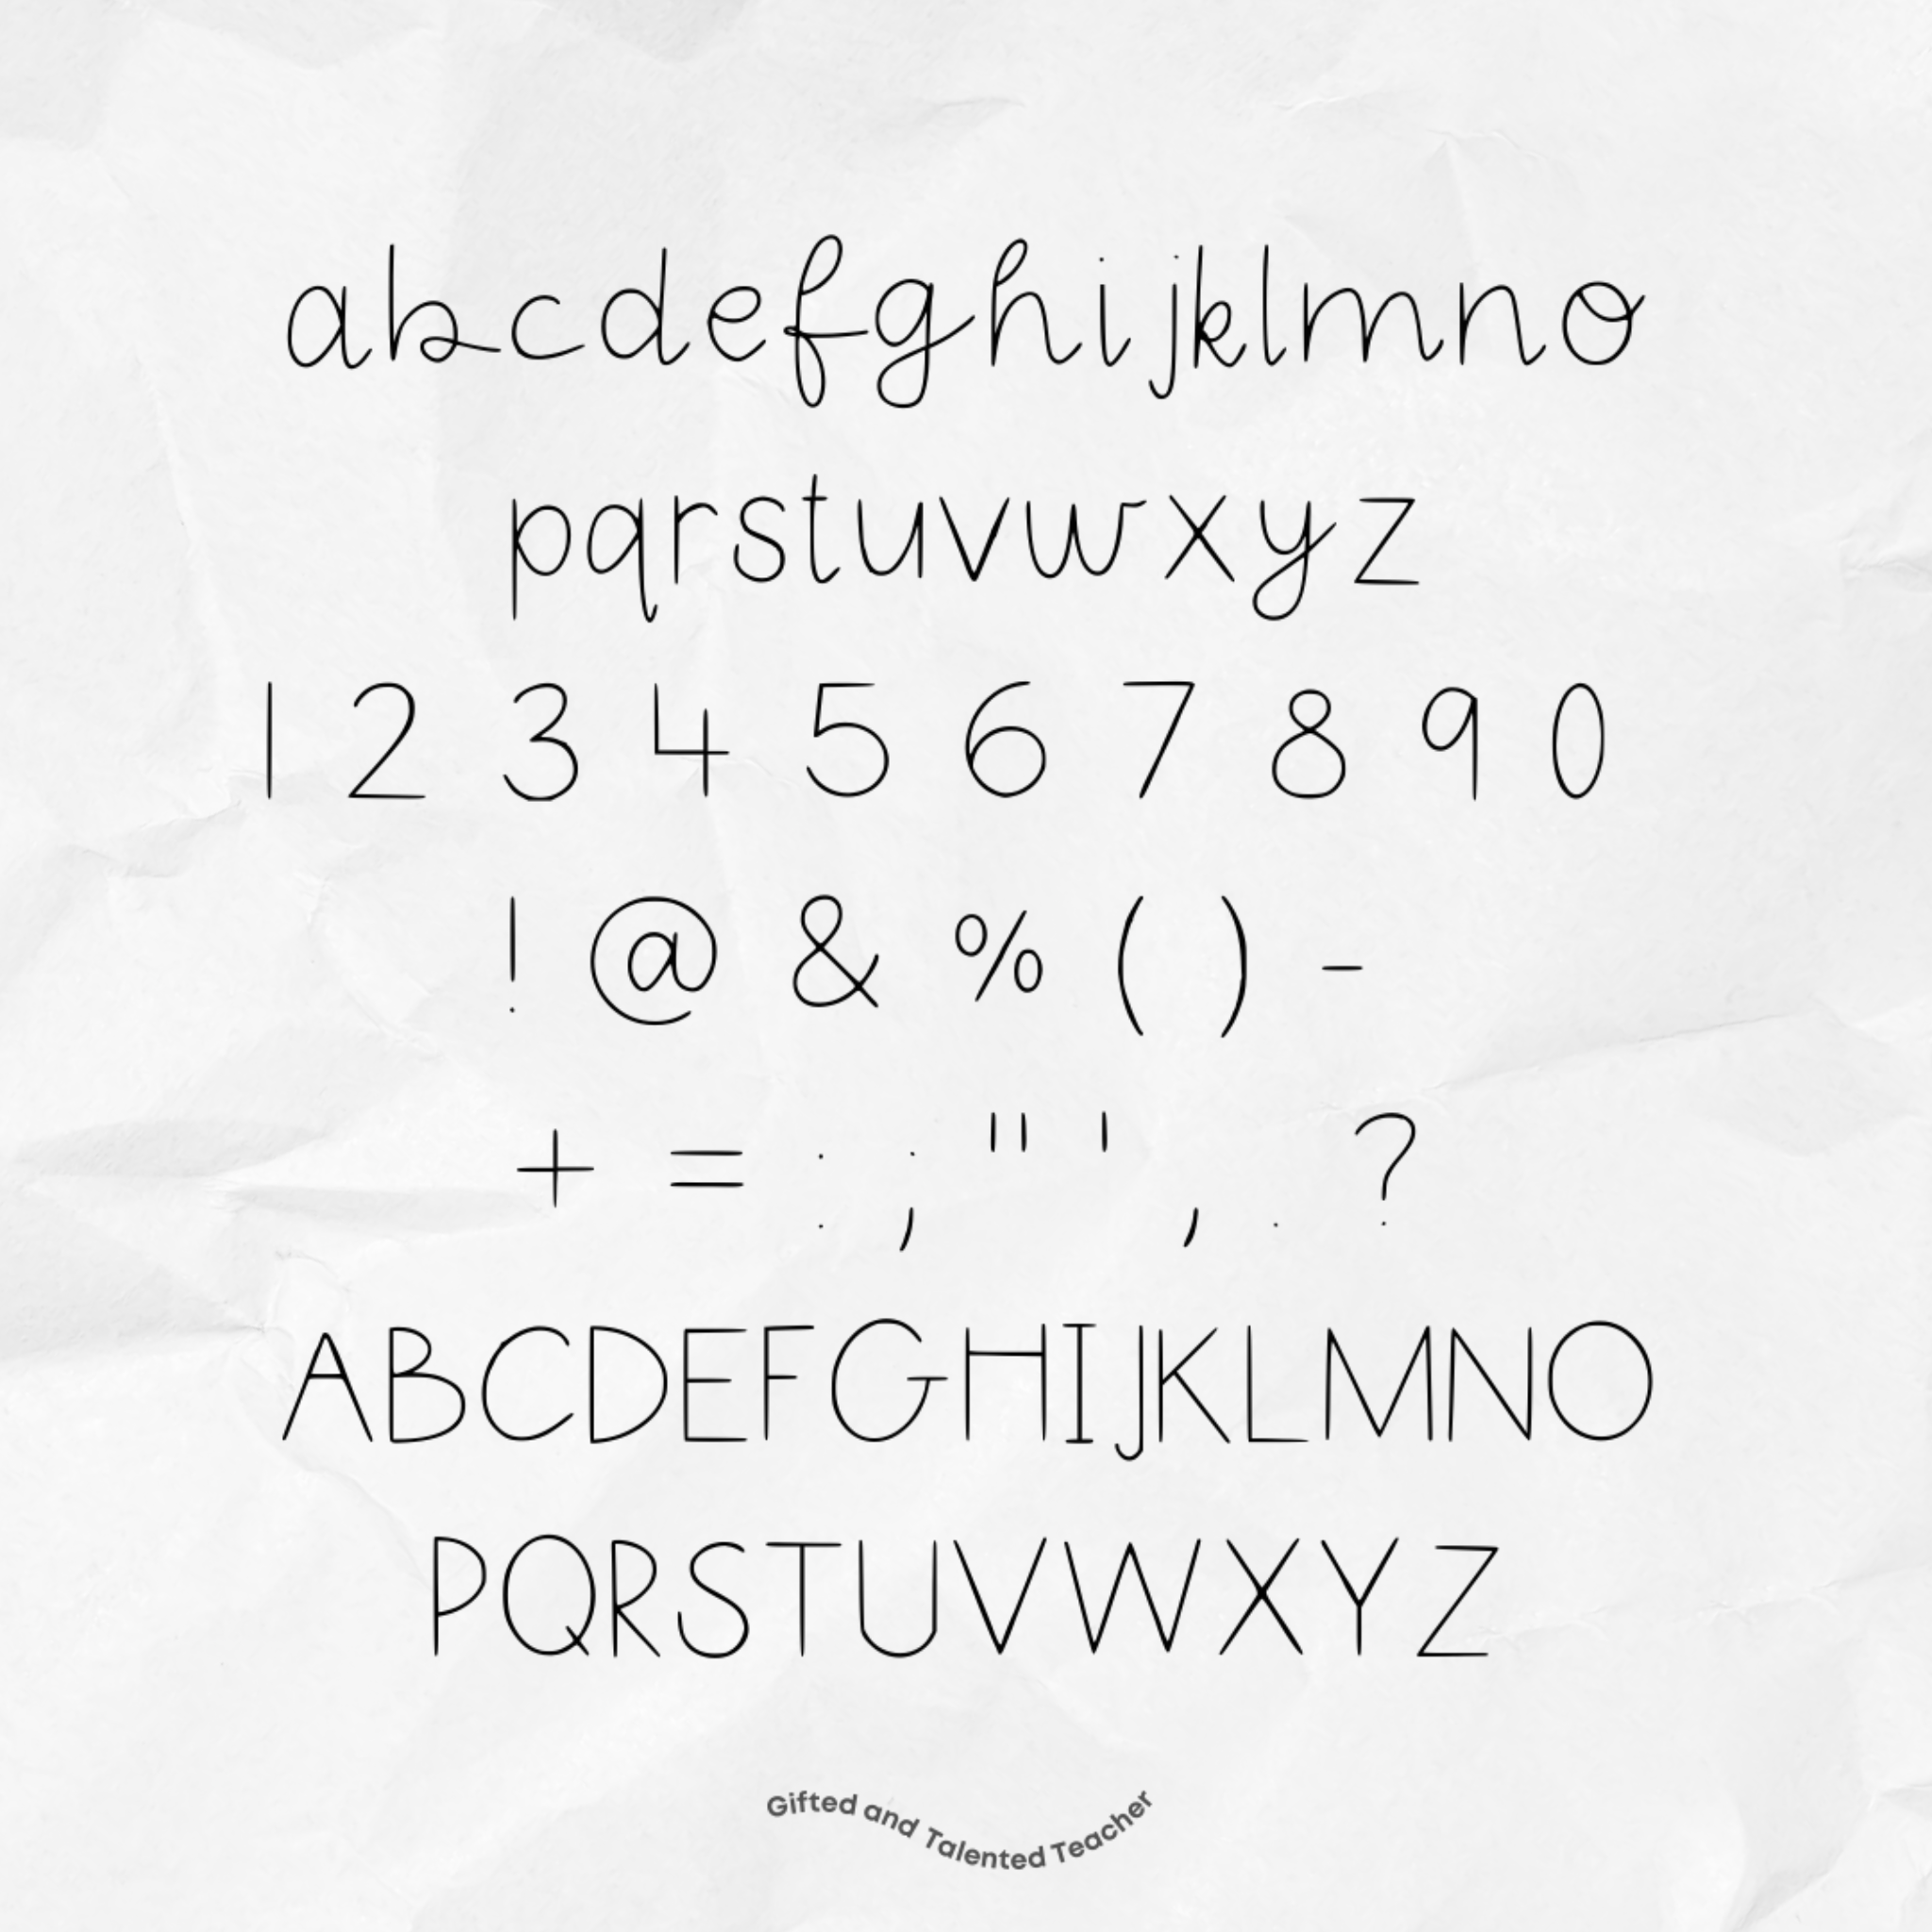 Fiddle Regular - GT Font - Gifted and Talented Teacher